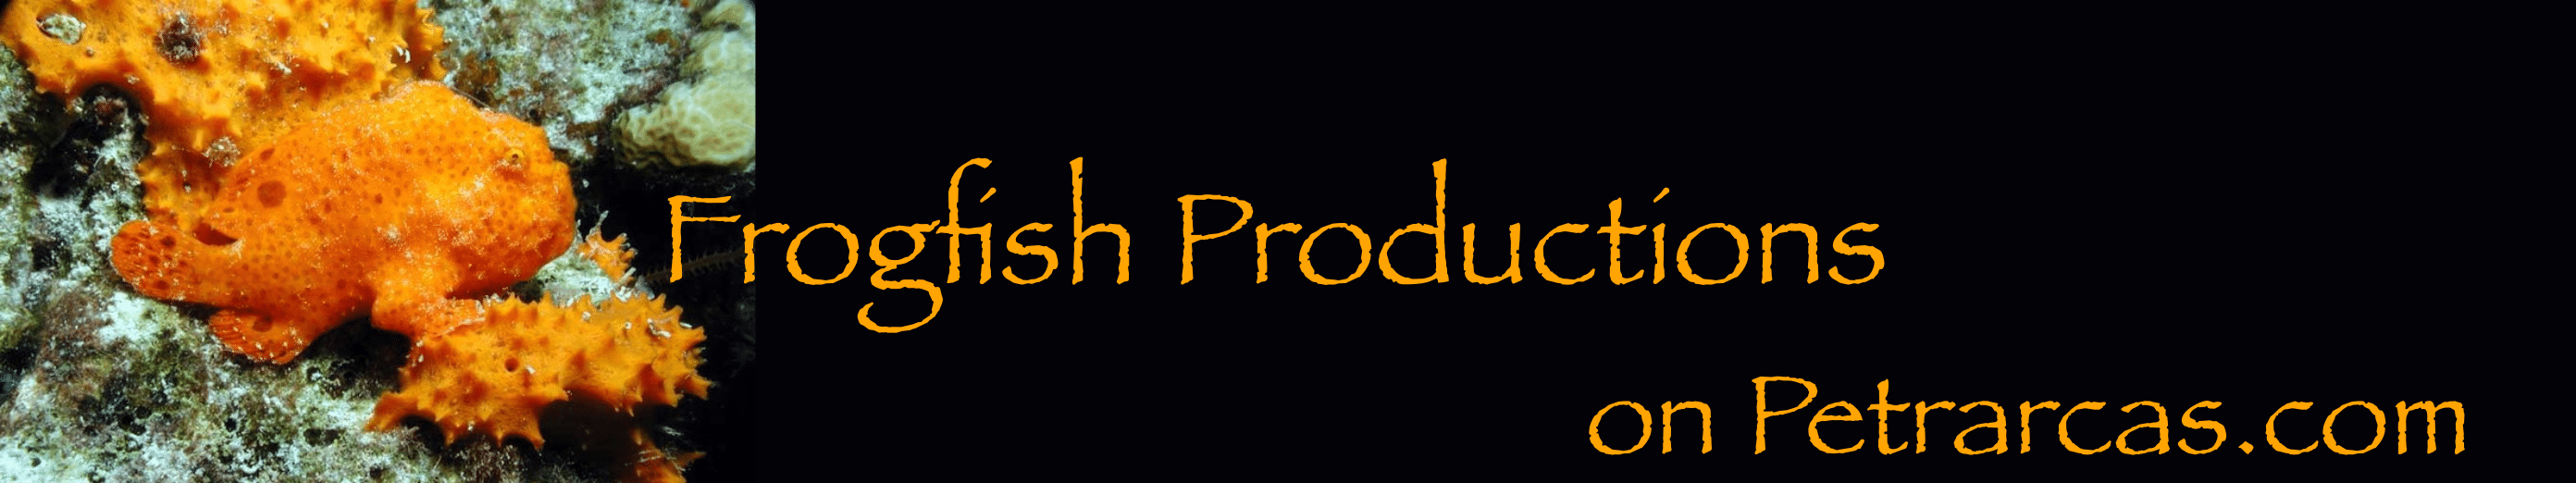 Frogfish Banner